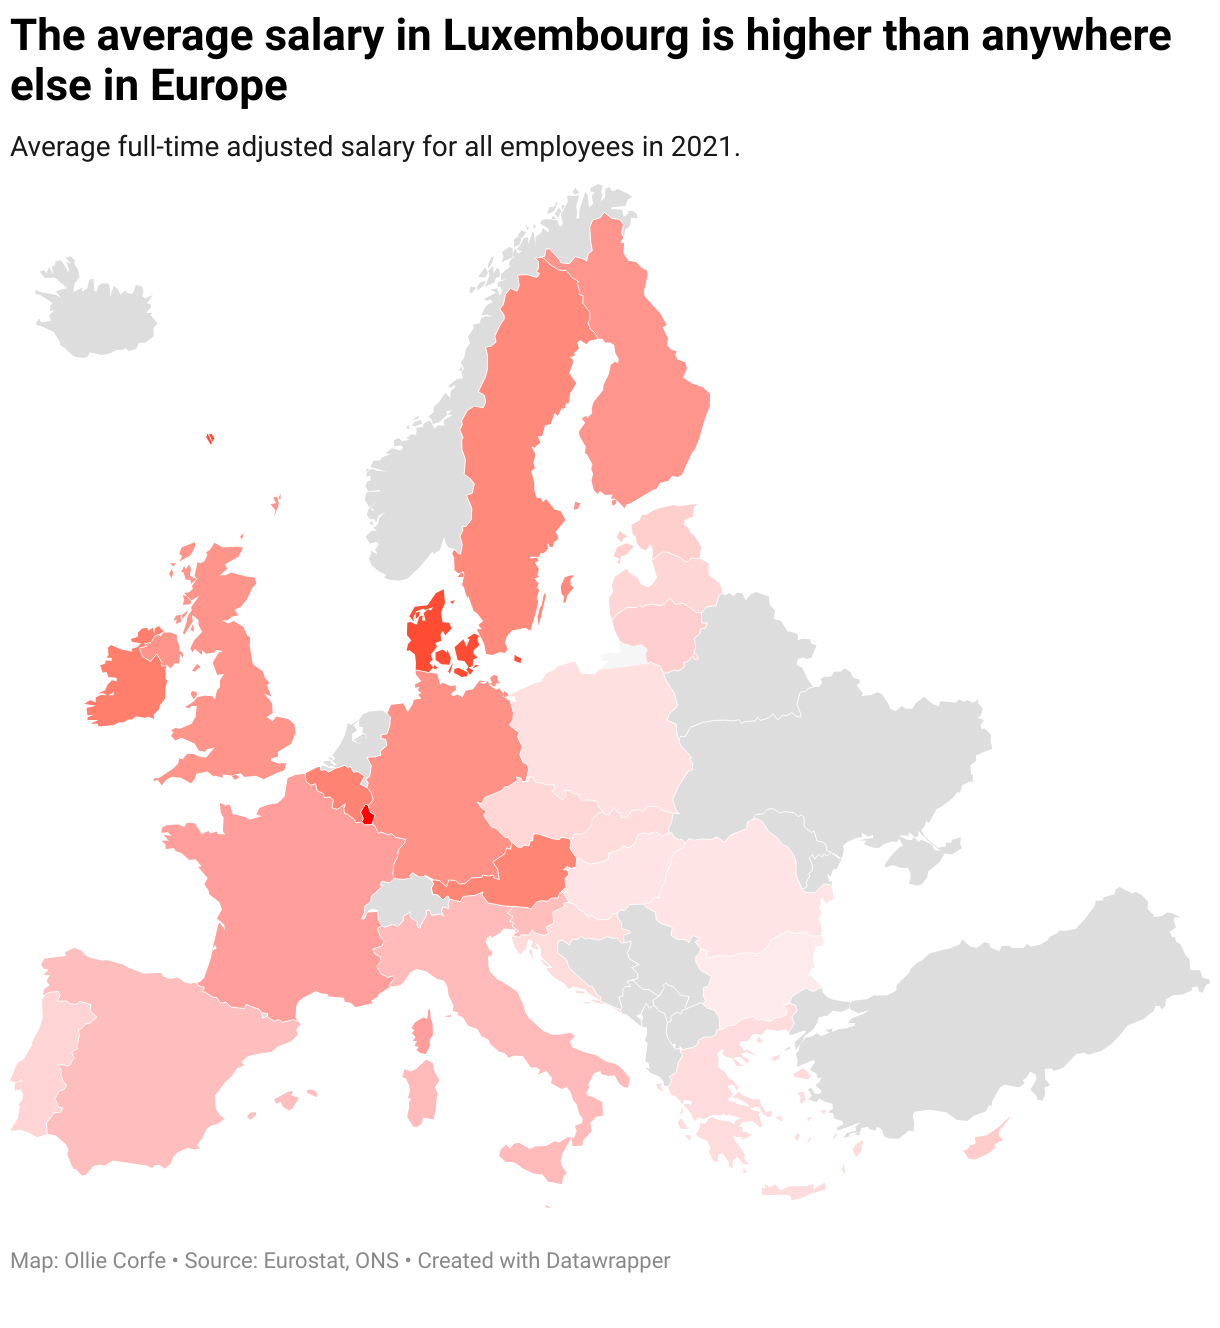 Map of Europe coloured by average salaries.